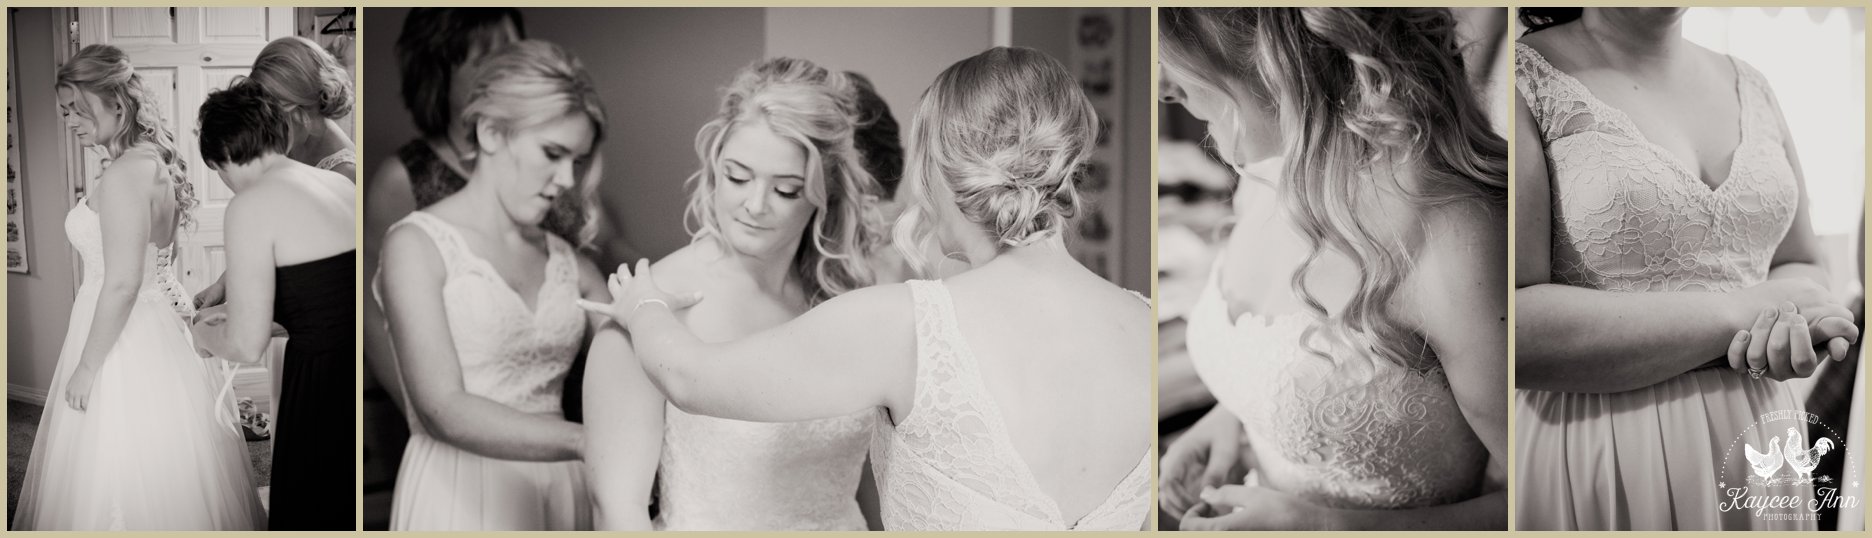 black and white, dress details, tying up wedding dress, curled hair, blonde bride, canada